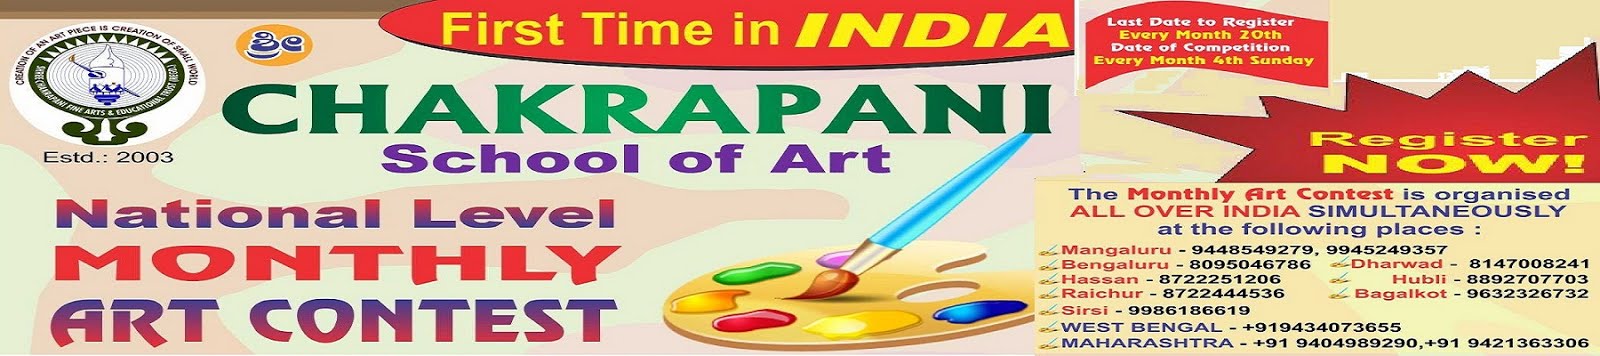 MONTHLY ART CONTEST IN INDIA